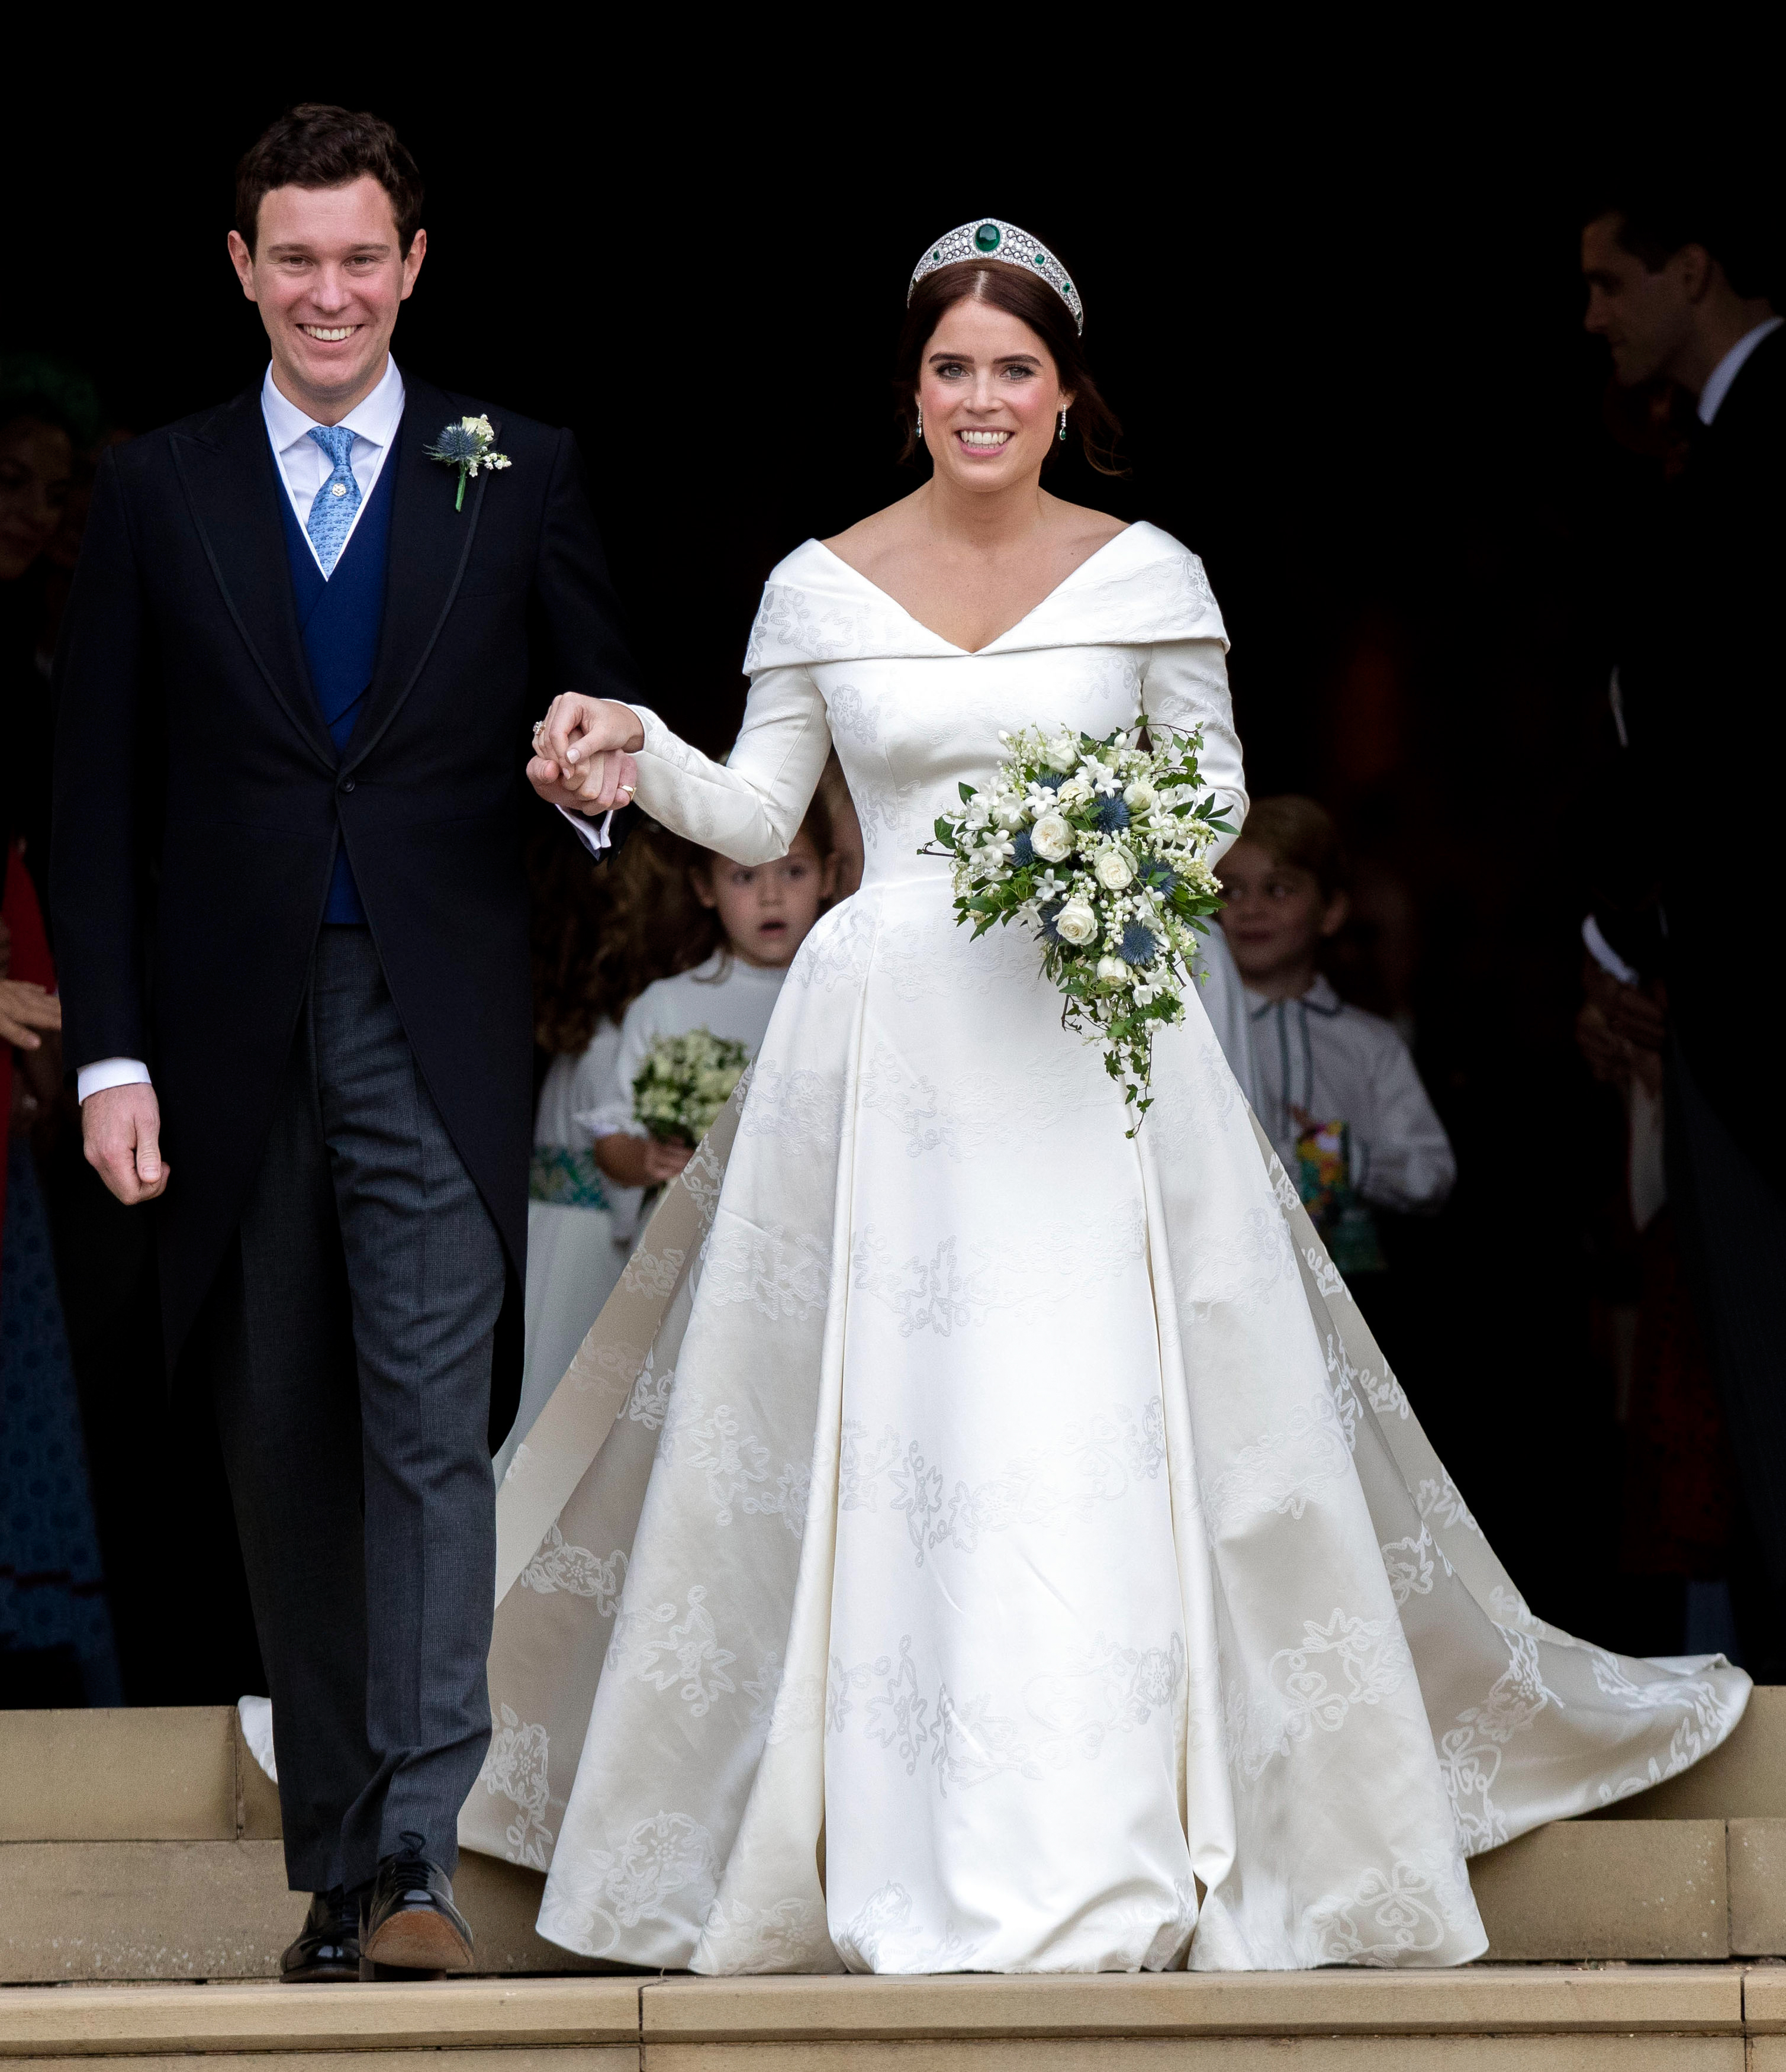 UK's Princess Eugenie Marries 'Commoner' Who Is A Wine Merchant (Photos)